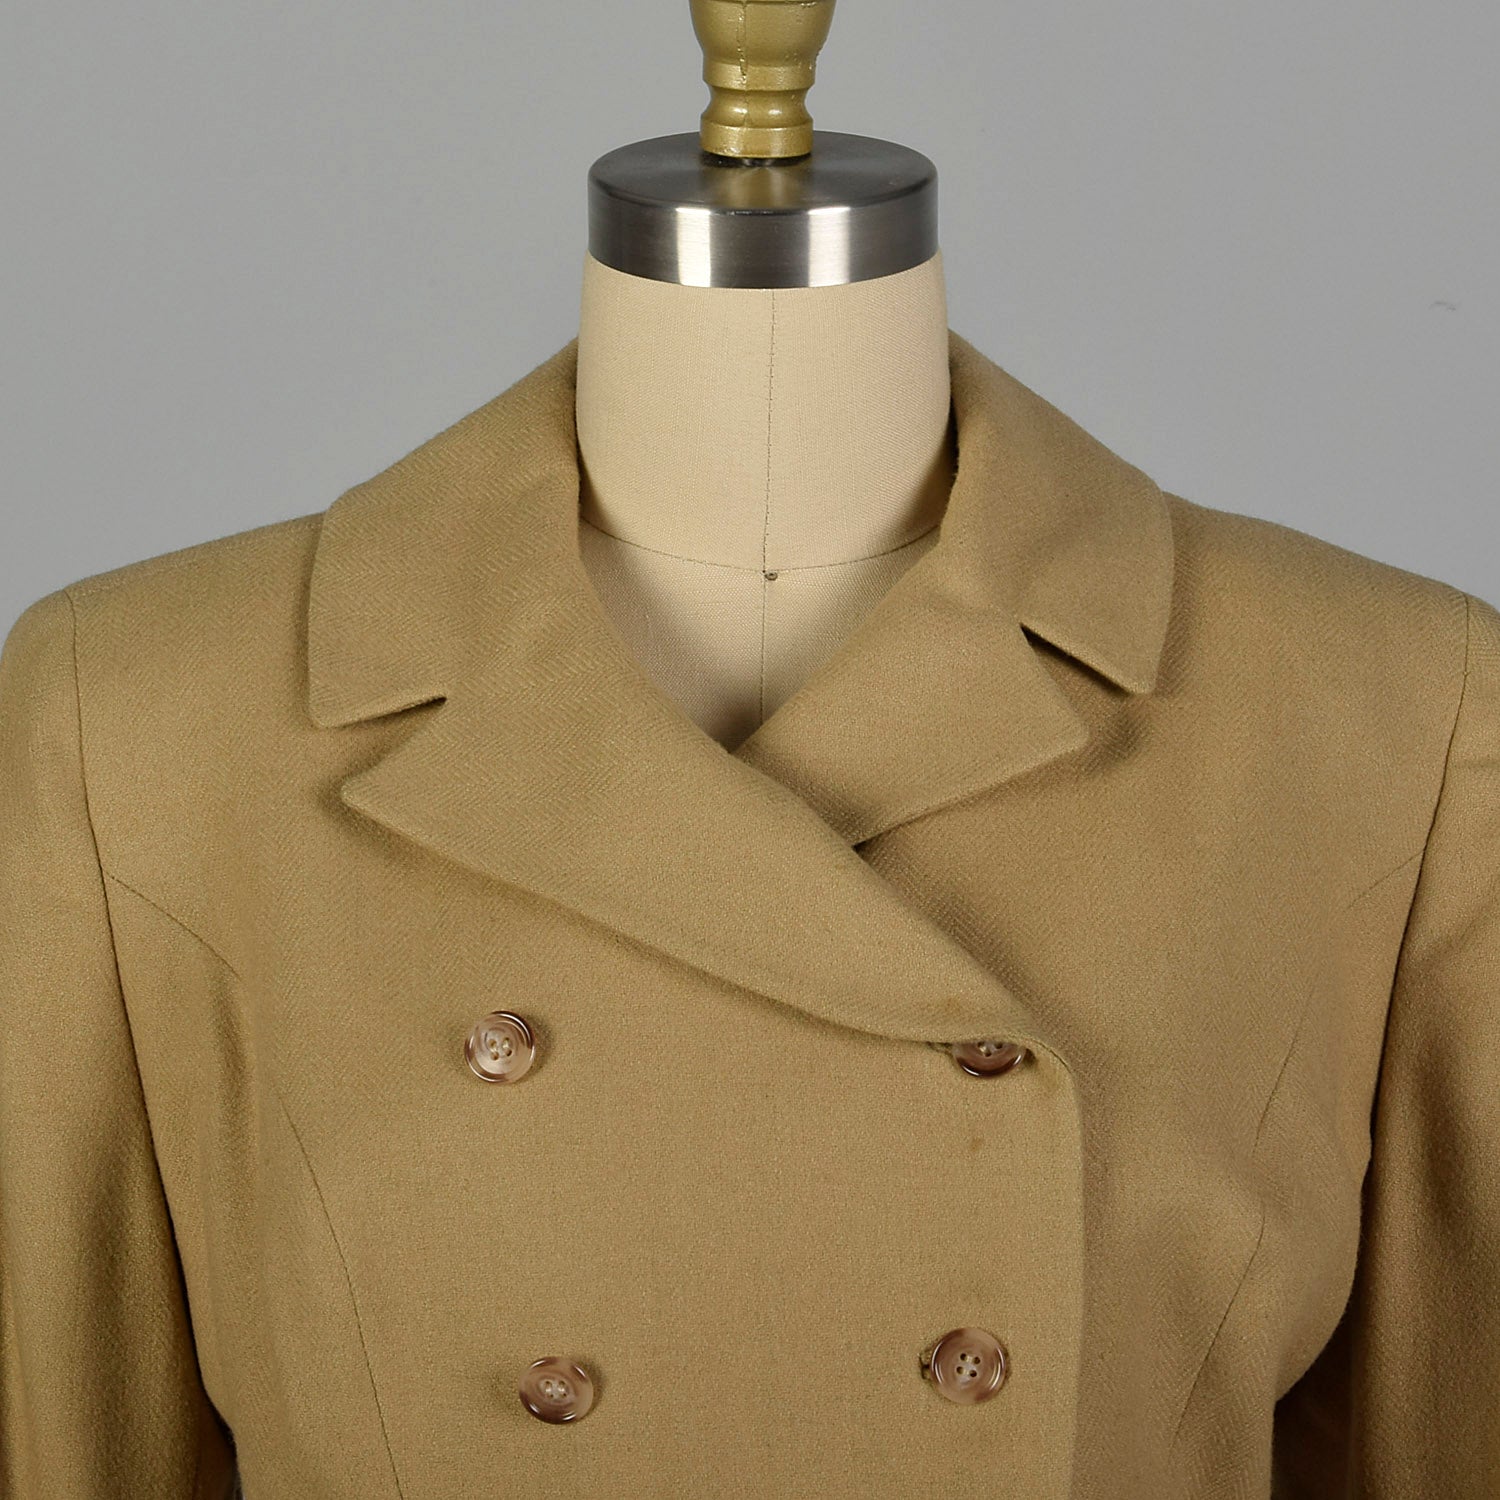 Small 1950s Tan Wool Skirt Suit